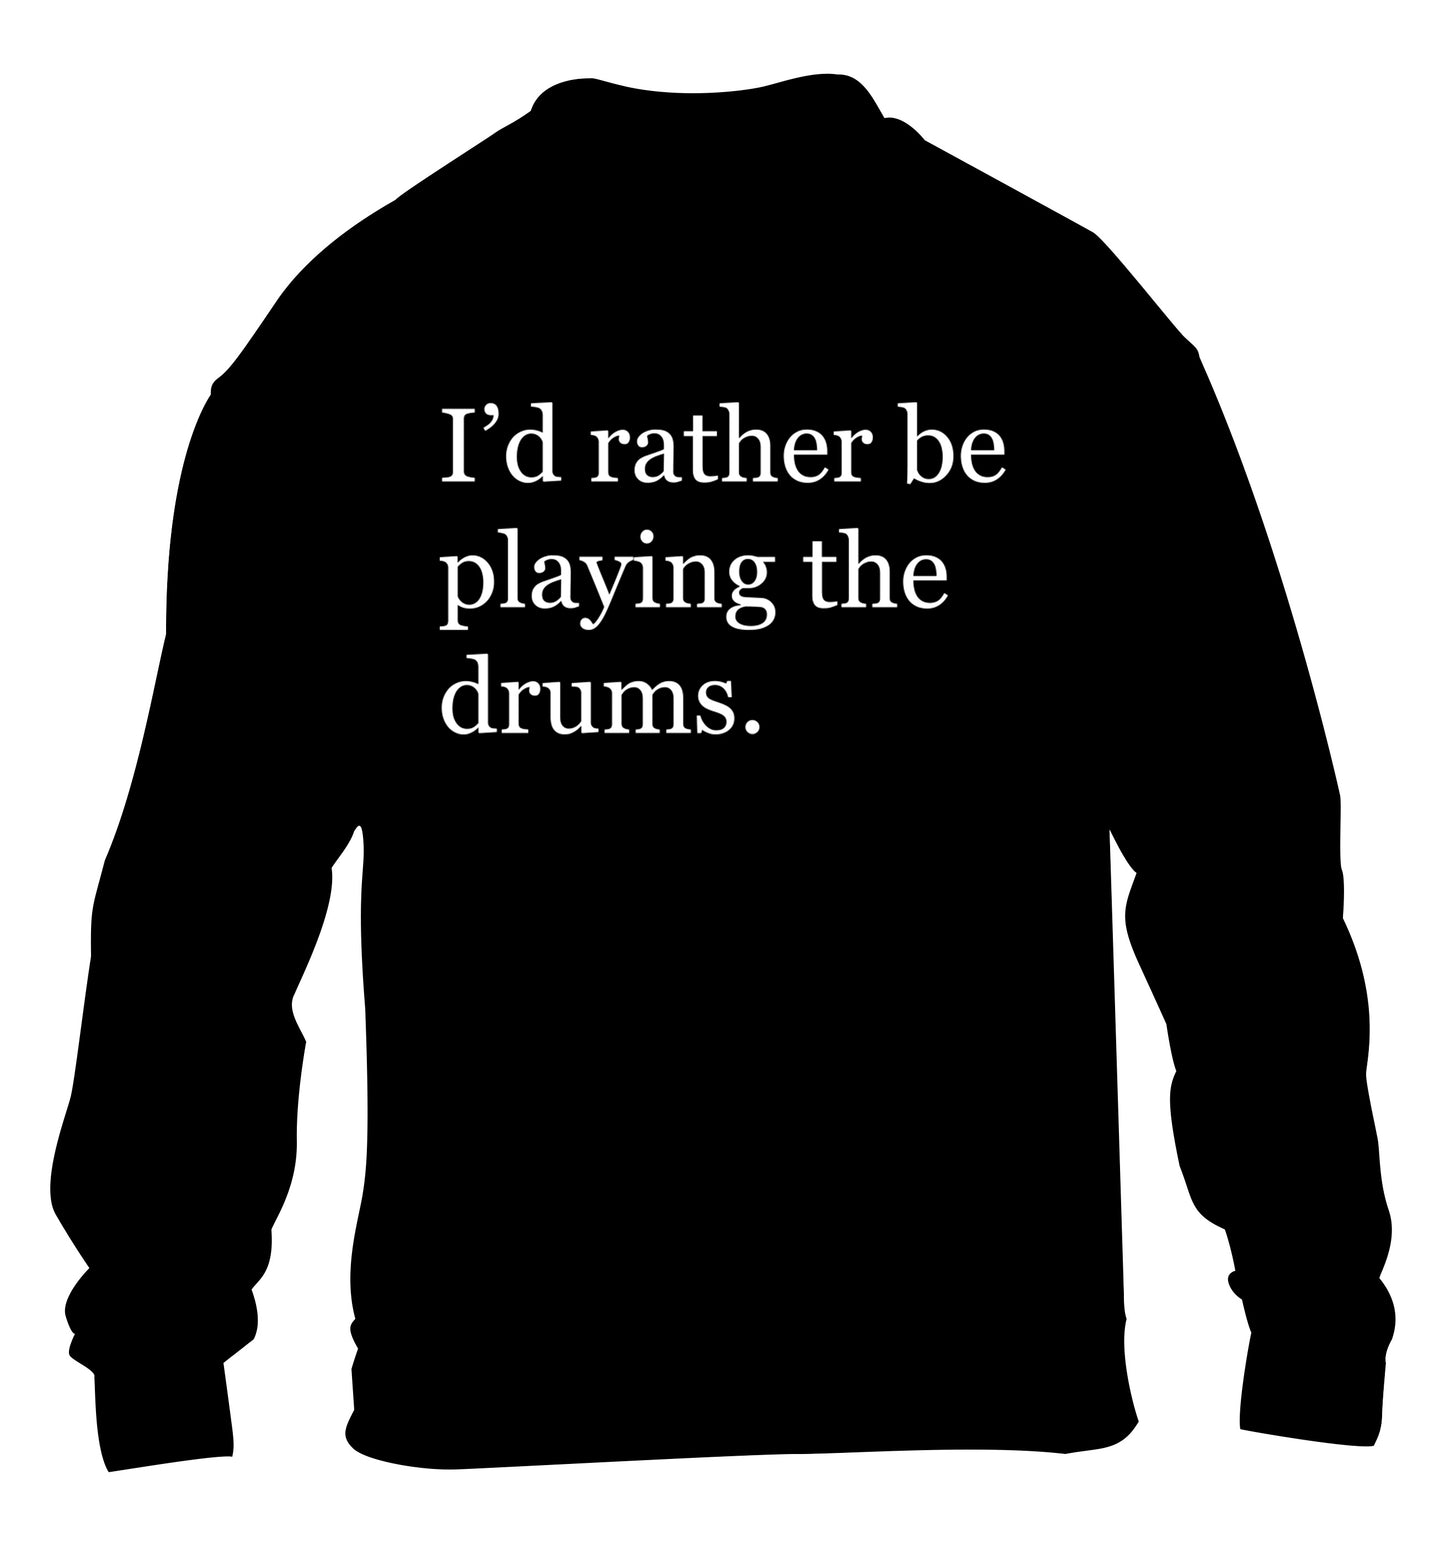 I'd rather be playing the drums children's black sweater 12-14 Years